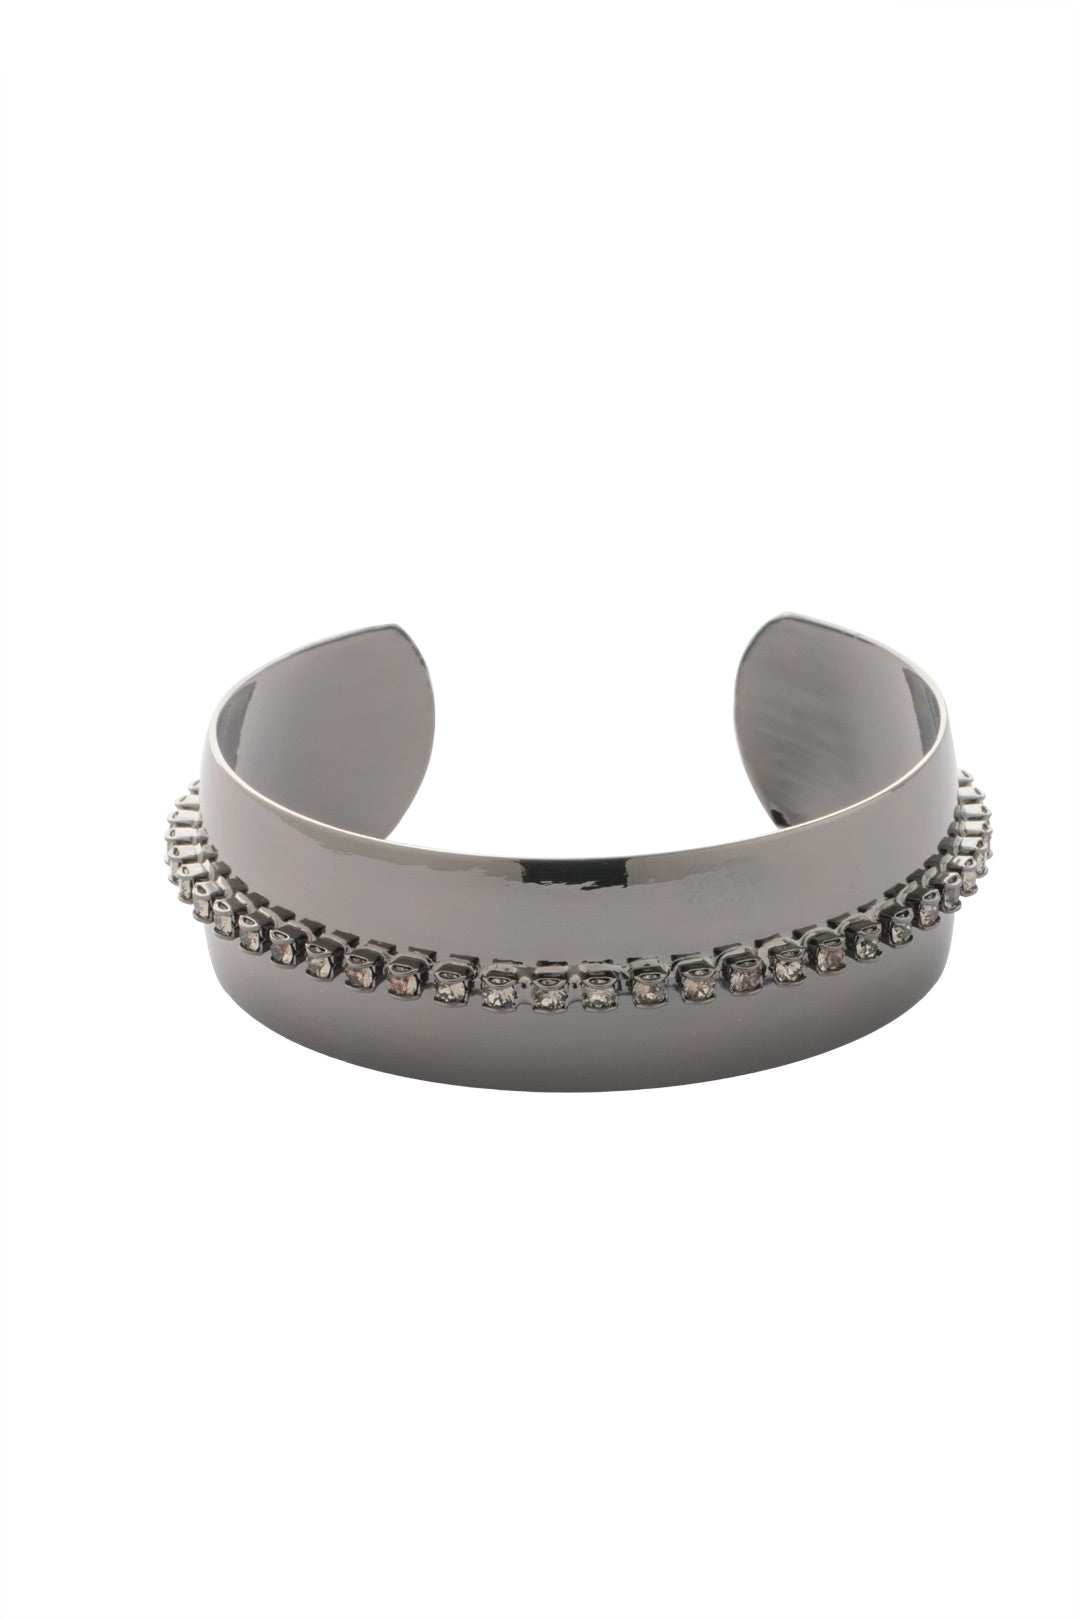 Embellished Cuff Bracelet - BFK3GMBD - <p>The Embellished Cuff Bracelet features a domed band cuff embellished with a line of clear crystals. From Sorrelli's Black Diamond collection in our Gun Metal finish.</p>